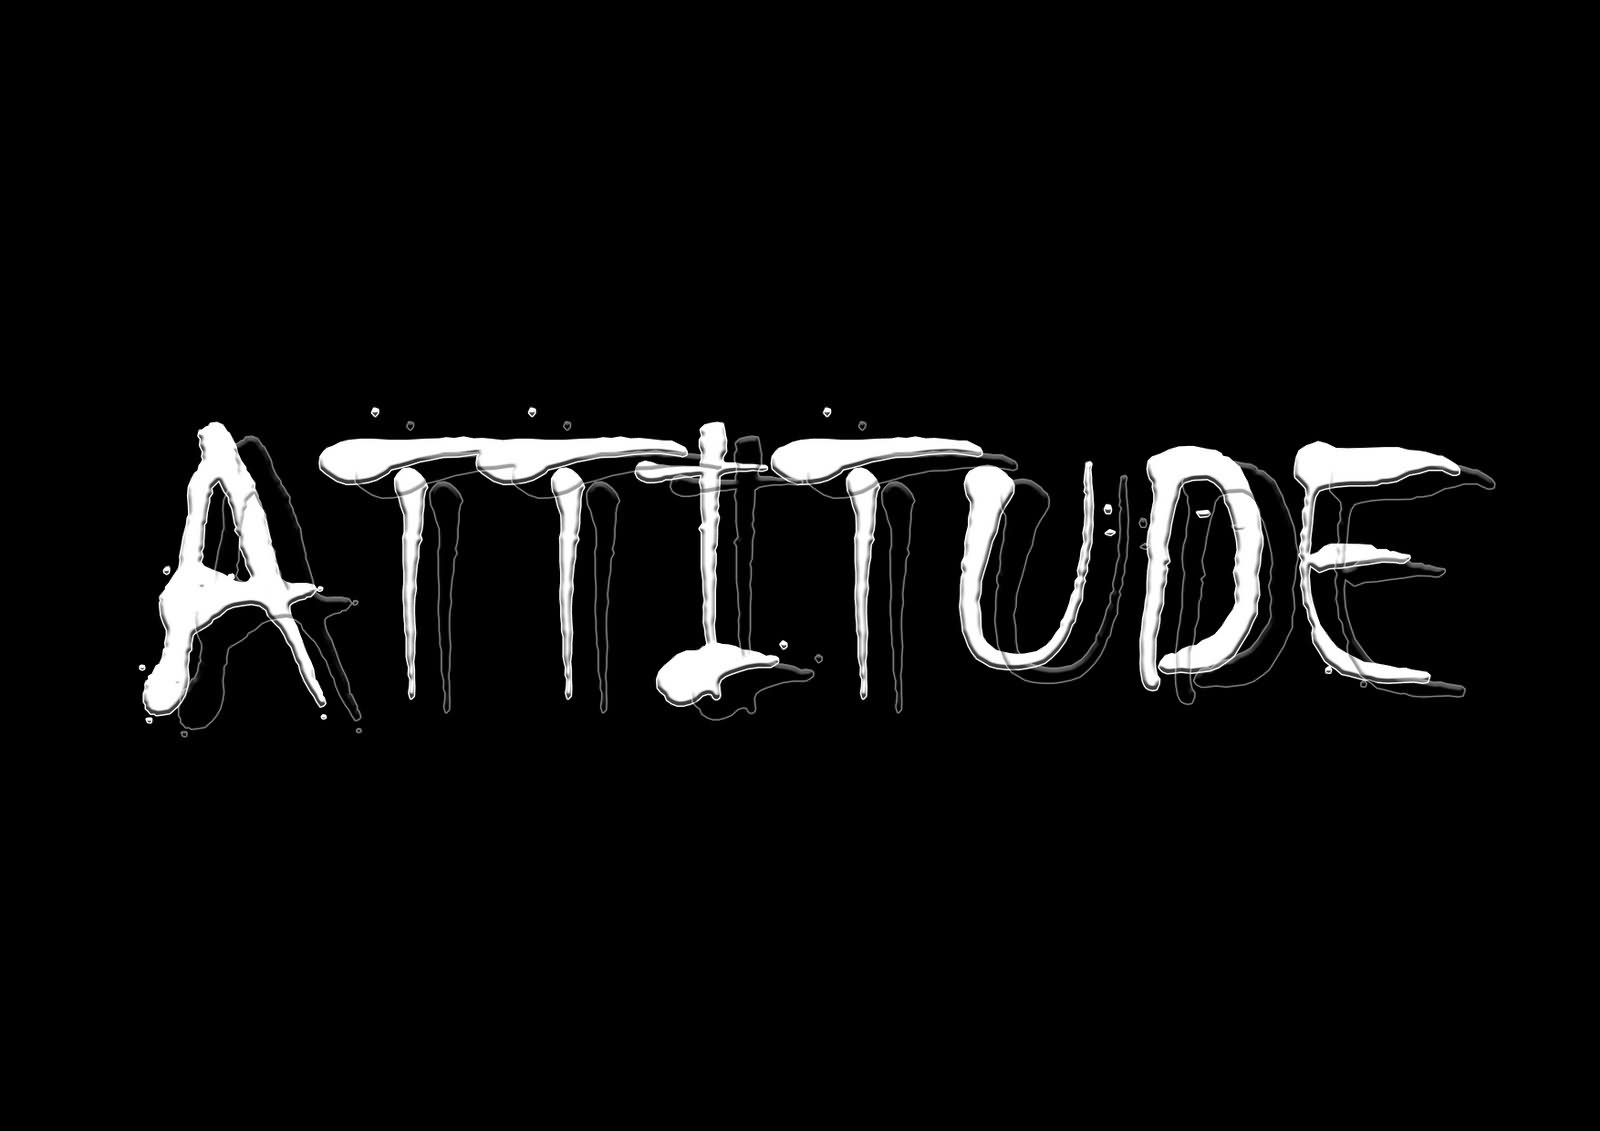 Wallpaper With Texts About Attitude